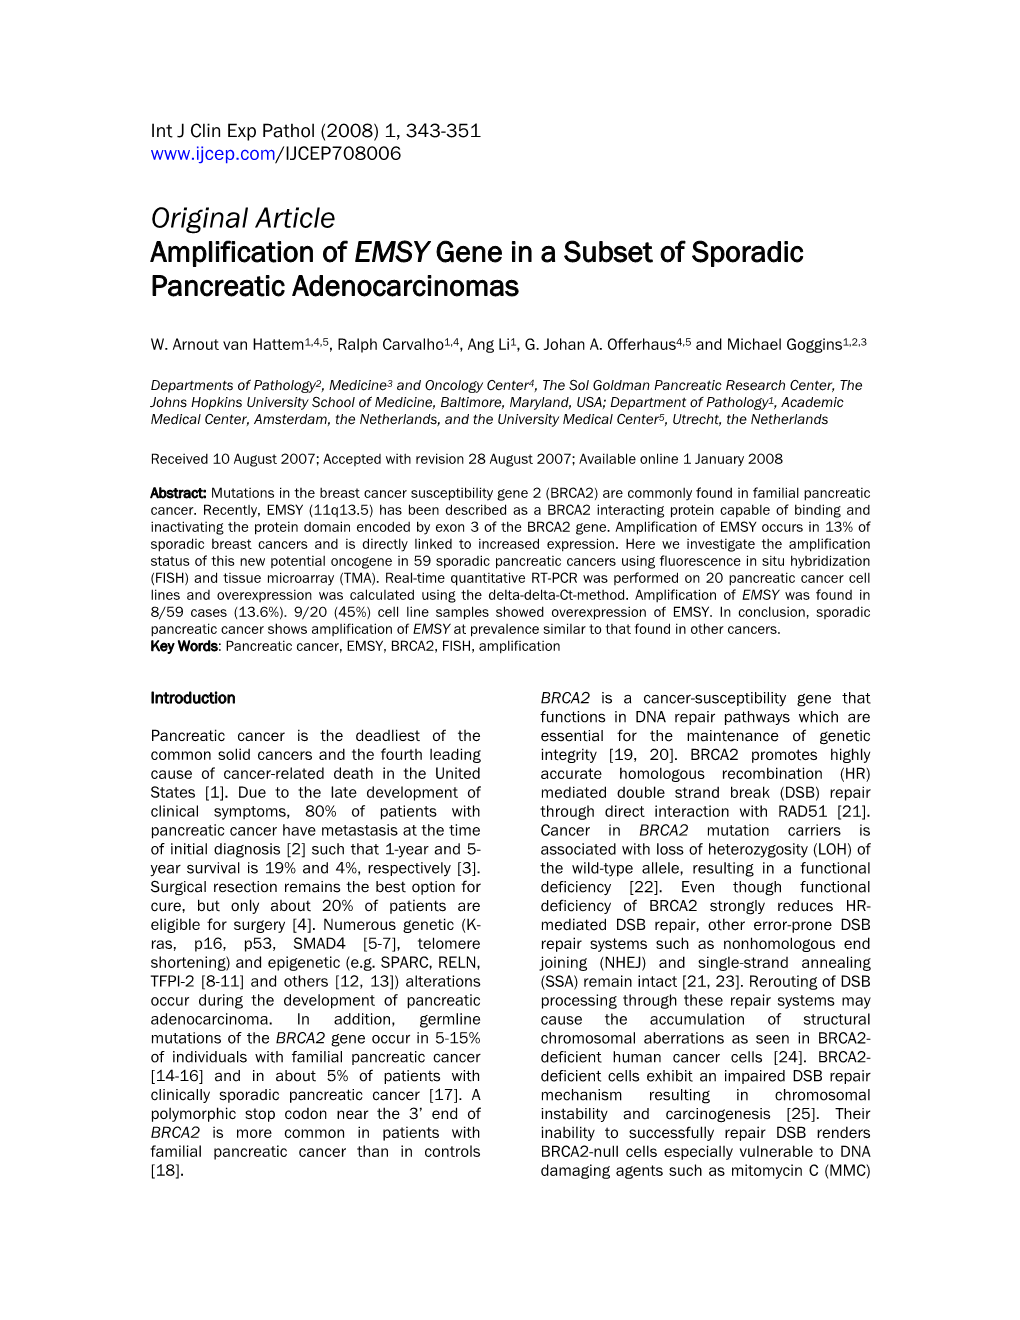 Amplification of Emsy in a Subset of Sporadic